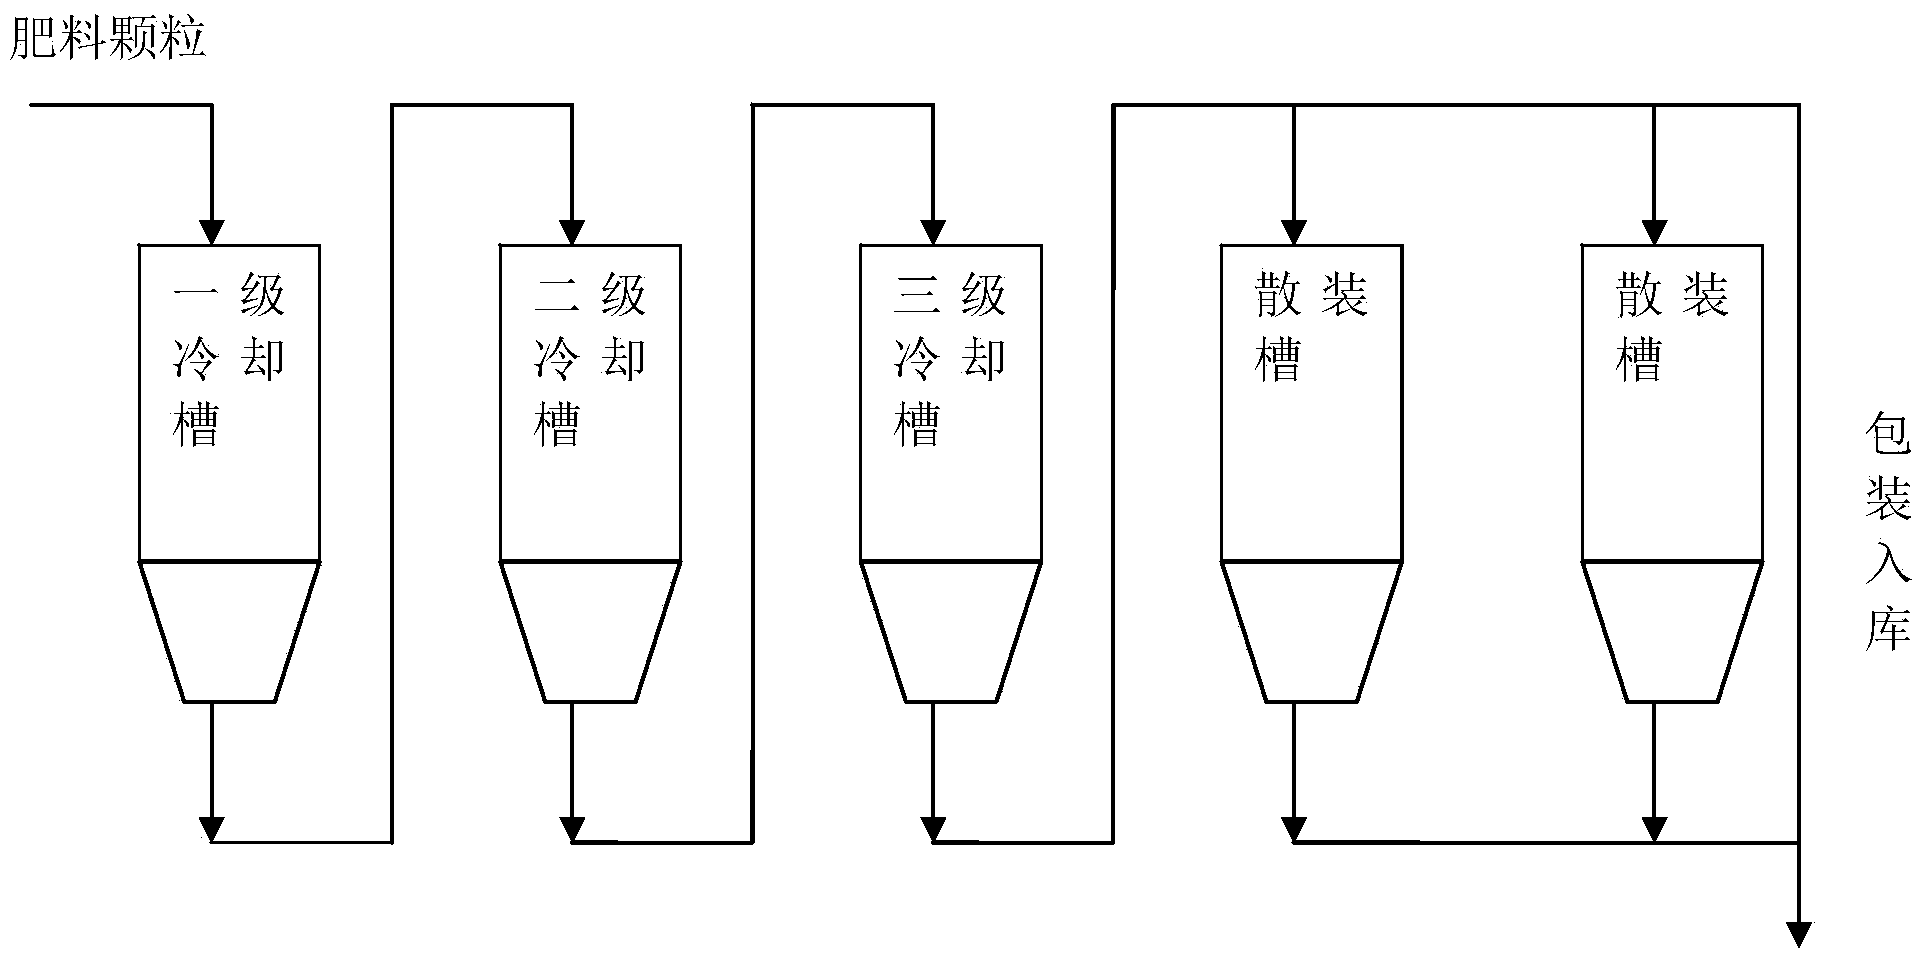 Fertilizer cooling method and device